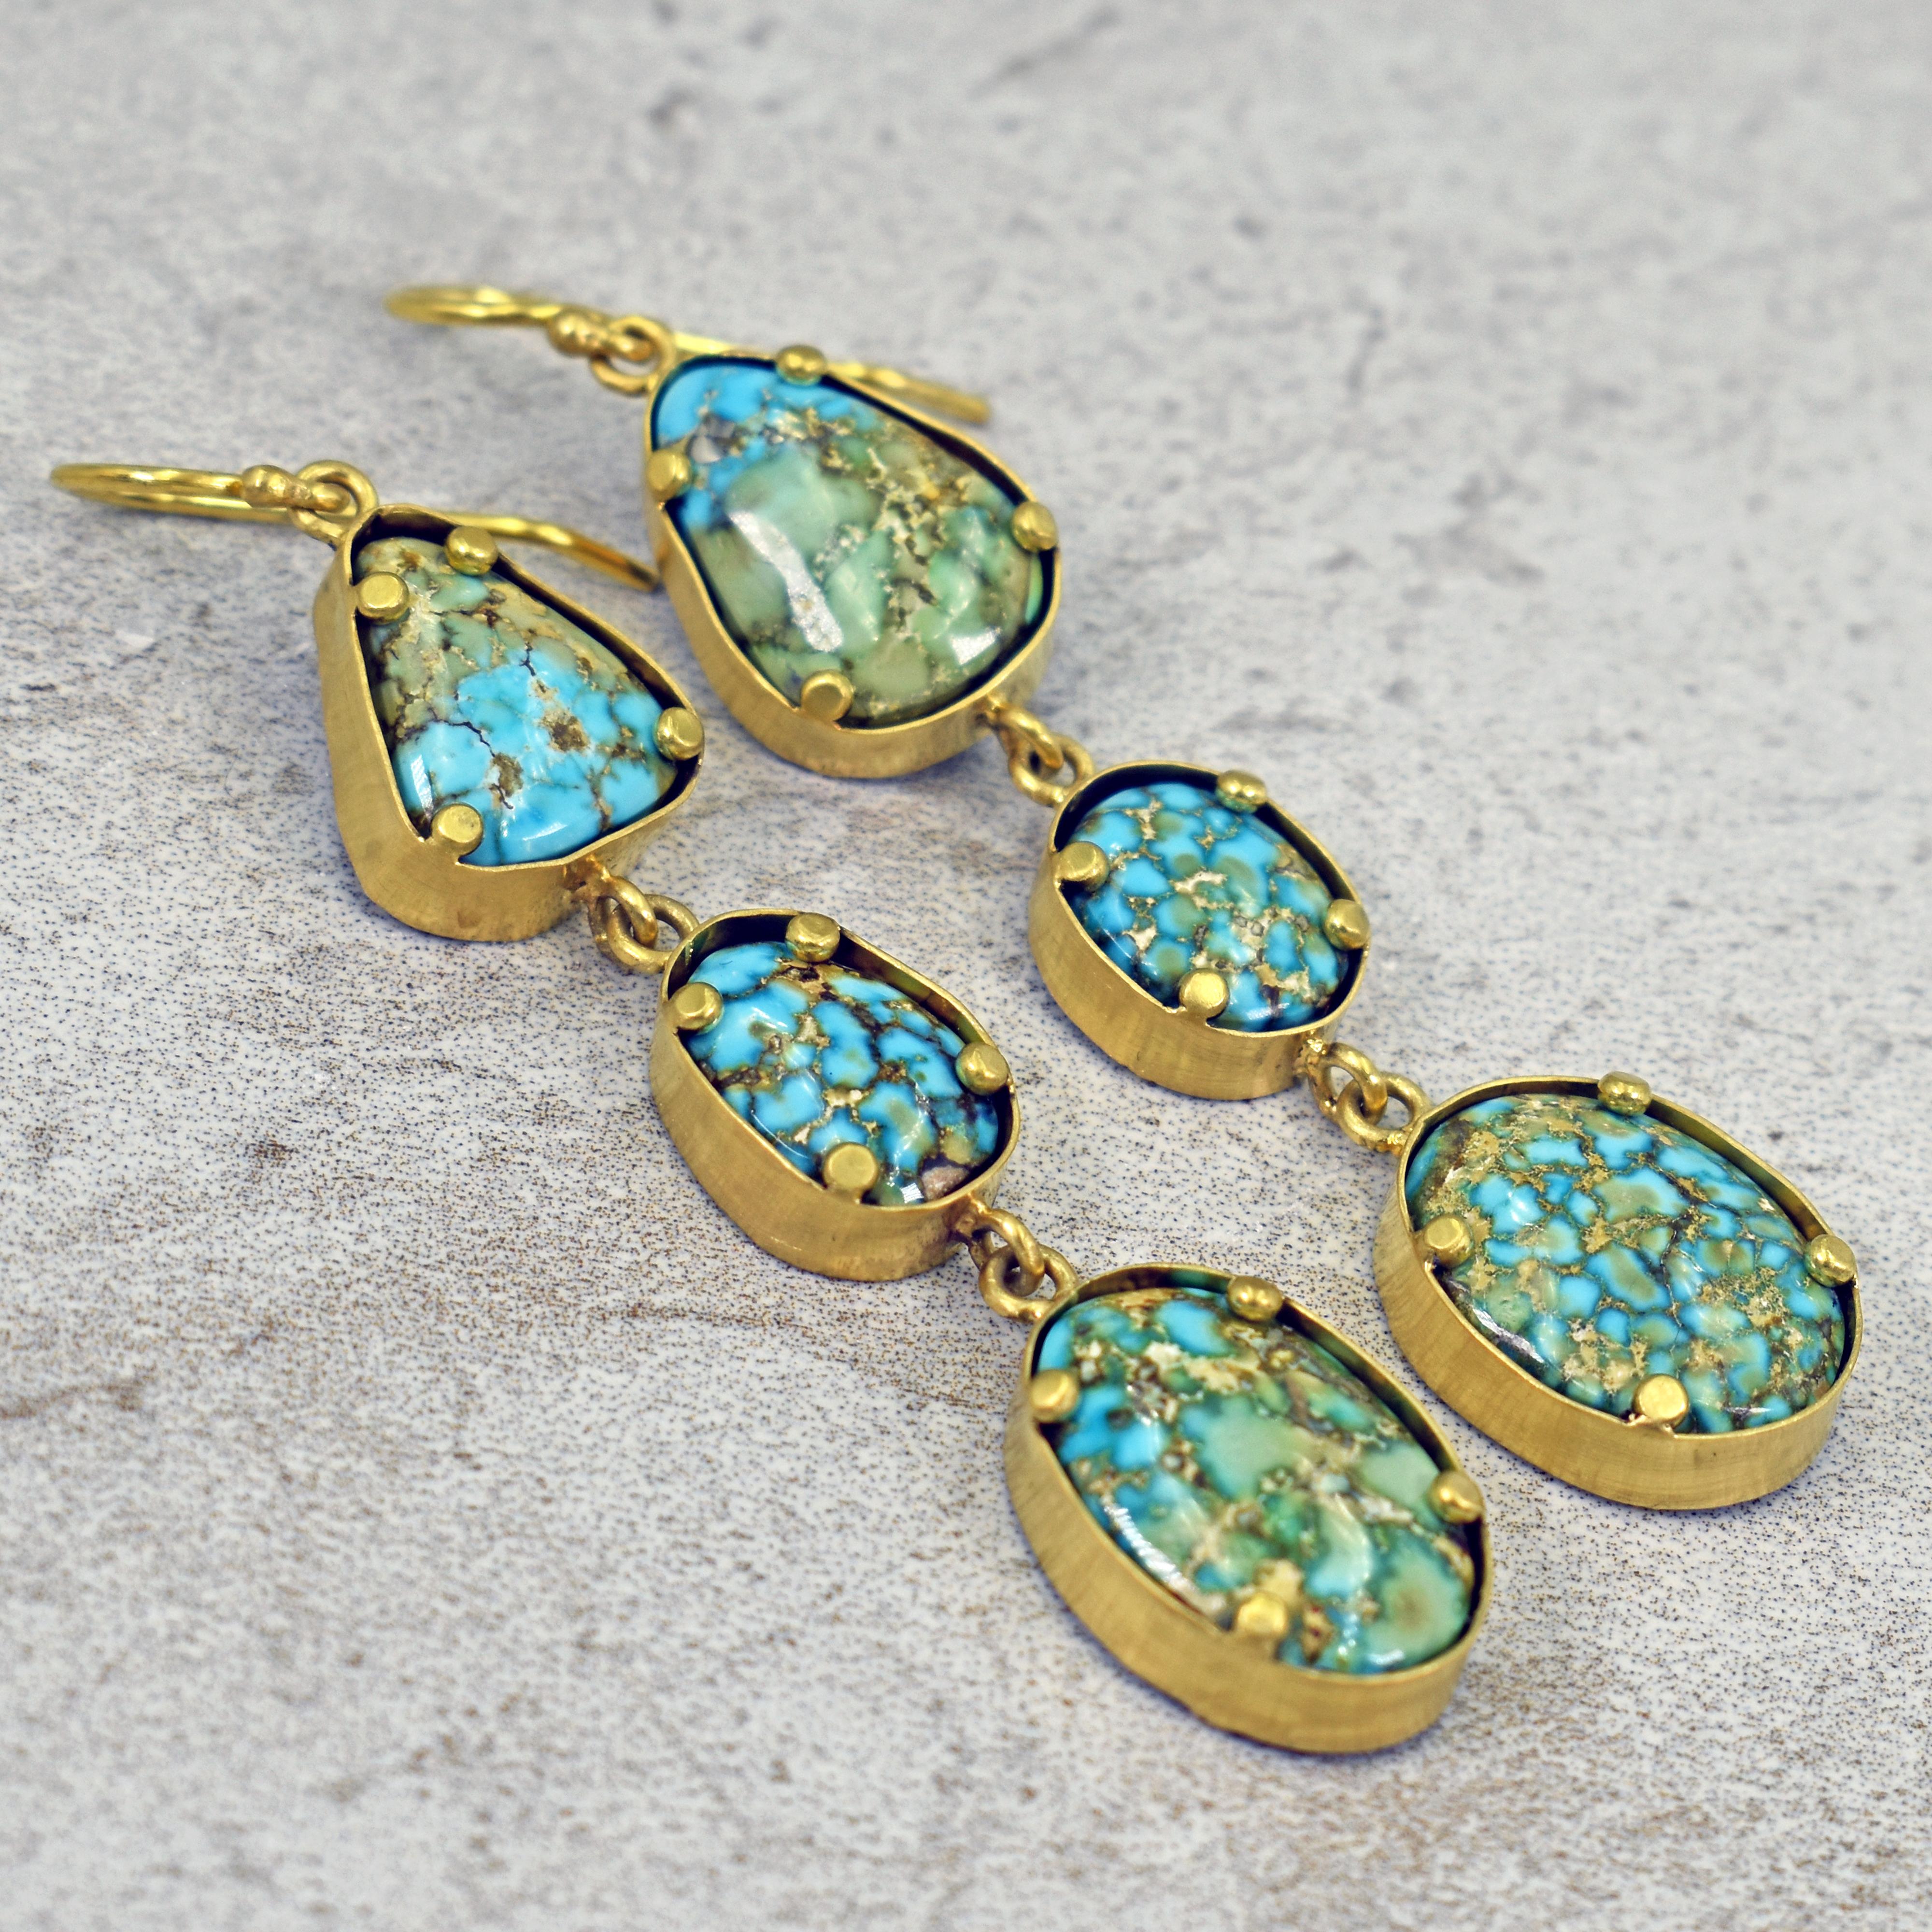 Gem-grade Turquoise Mountain cabochon 22k yellow gold three tier dangle earrings. Earrings are 3.13 inches in length. Gorgeous, one-of-a-kind dangle earrings featuring beautiful turquoise gemstones from the mine in Arizona, USA. 